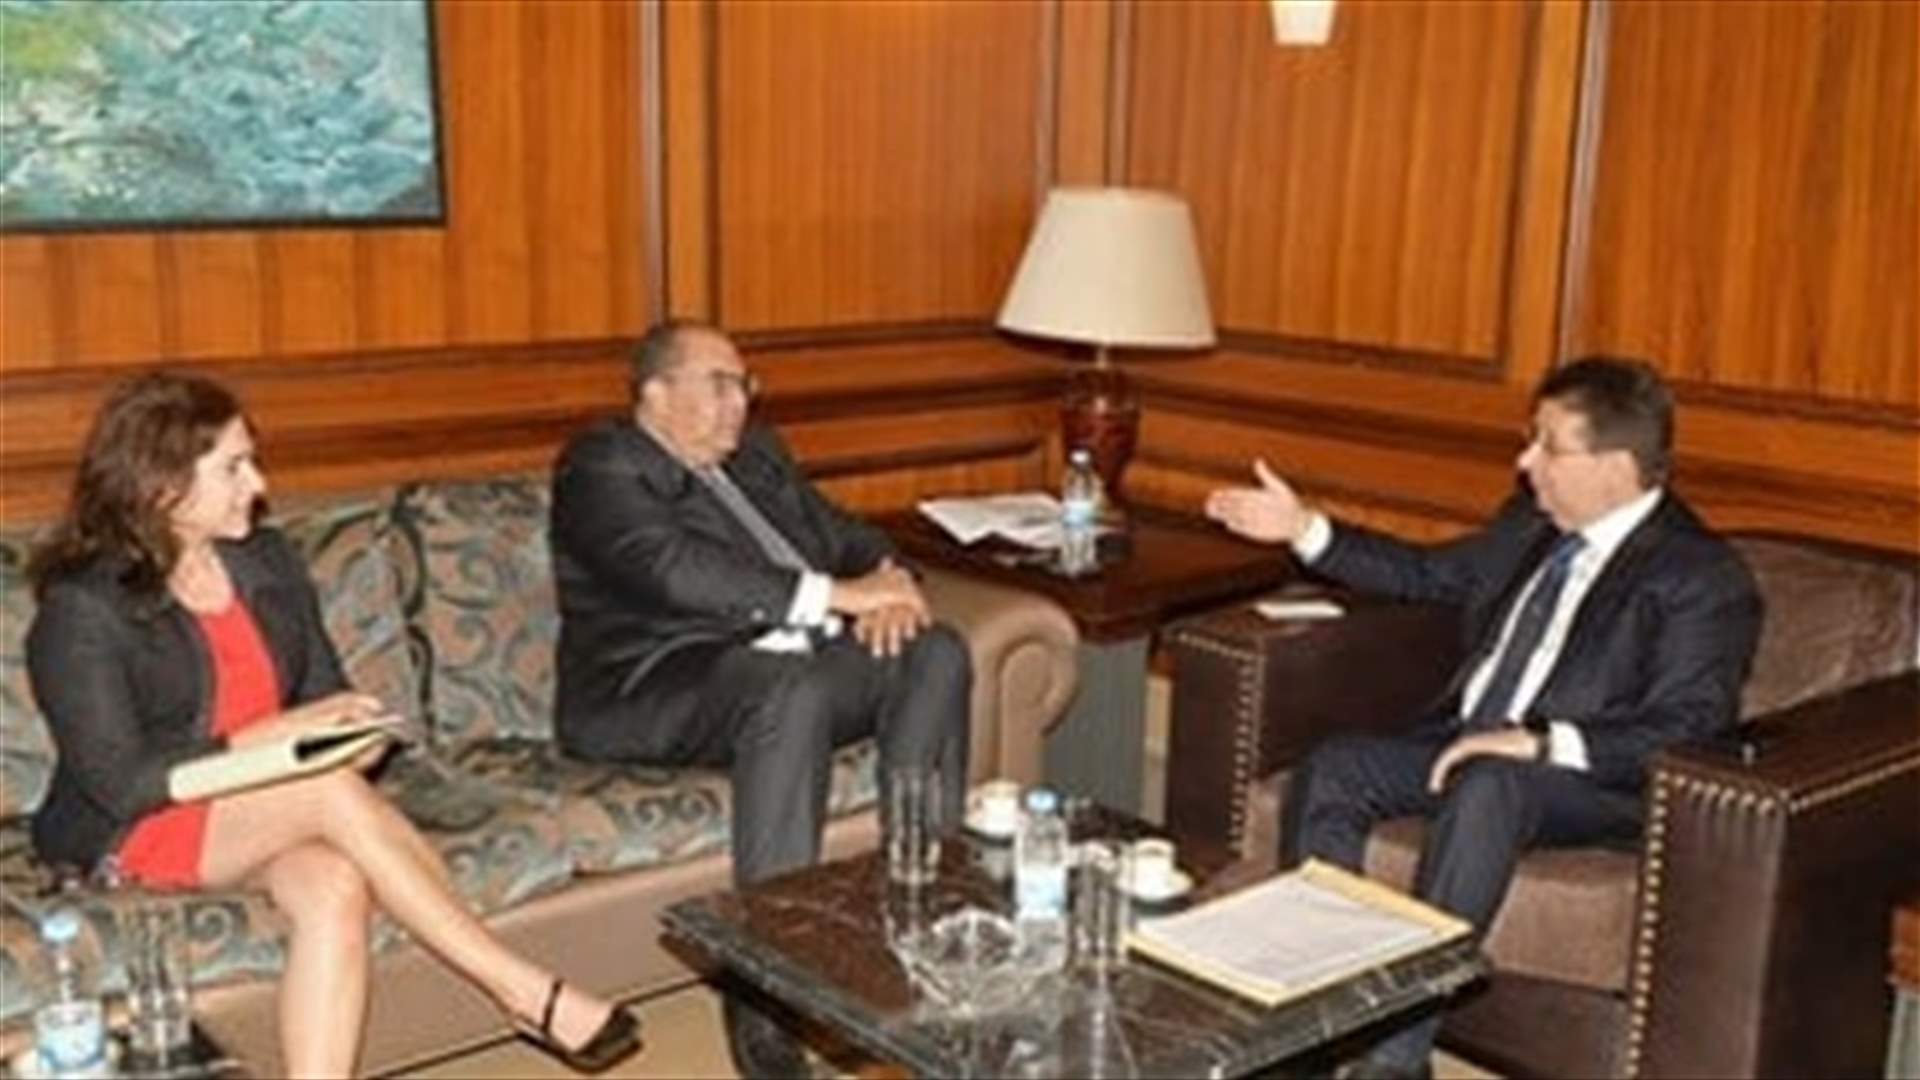 MP Kanaan discusses with IMF Executive Director ways of cooperation